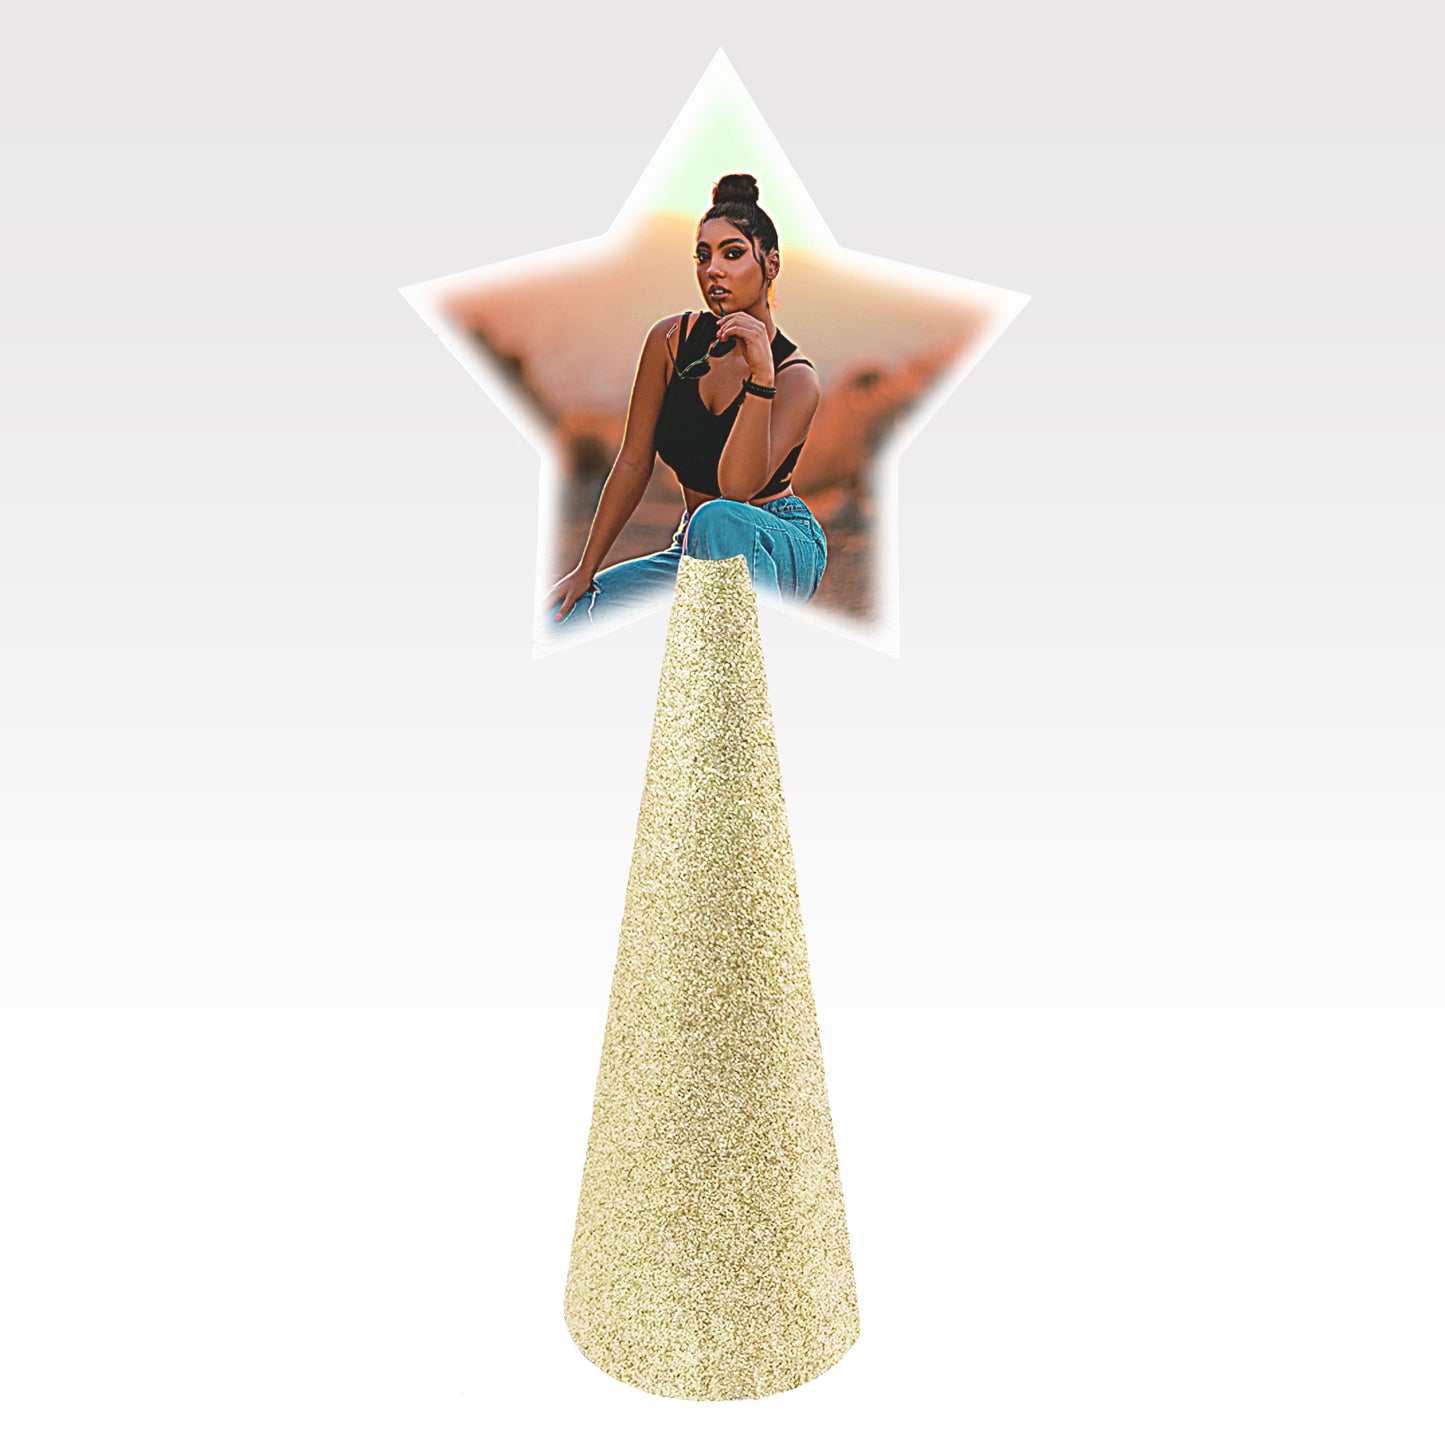 Custom tree topper - White Star with sample photo of woman in desert - champagne gold glitter cone